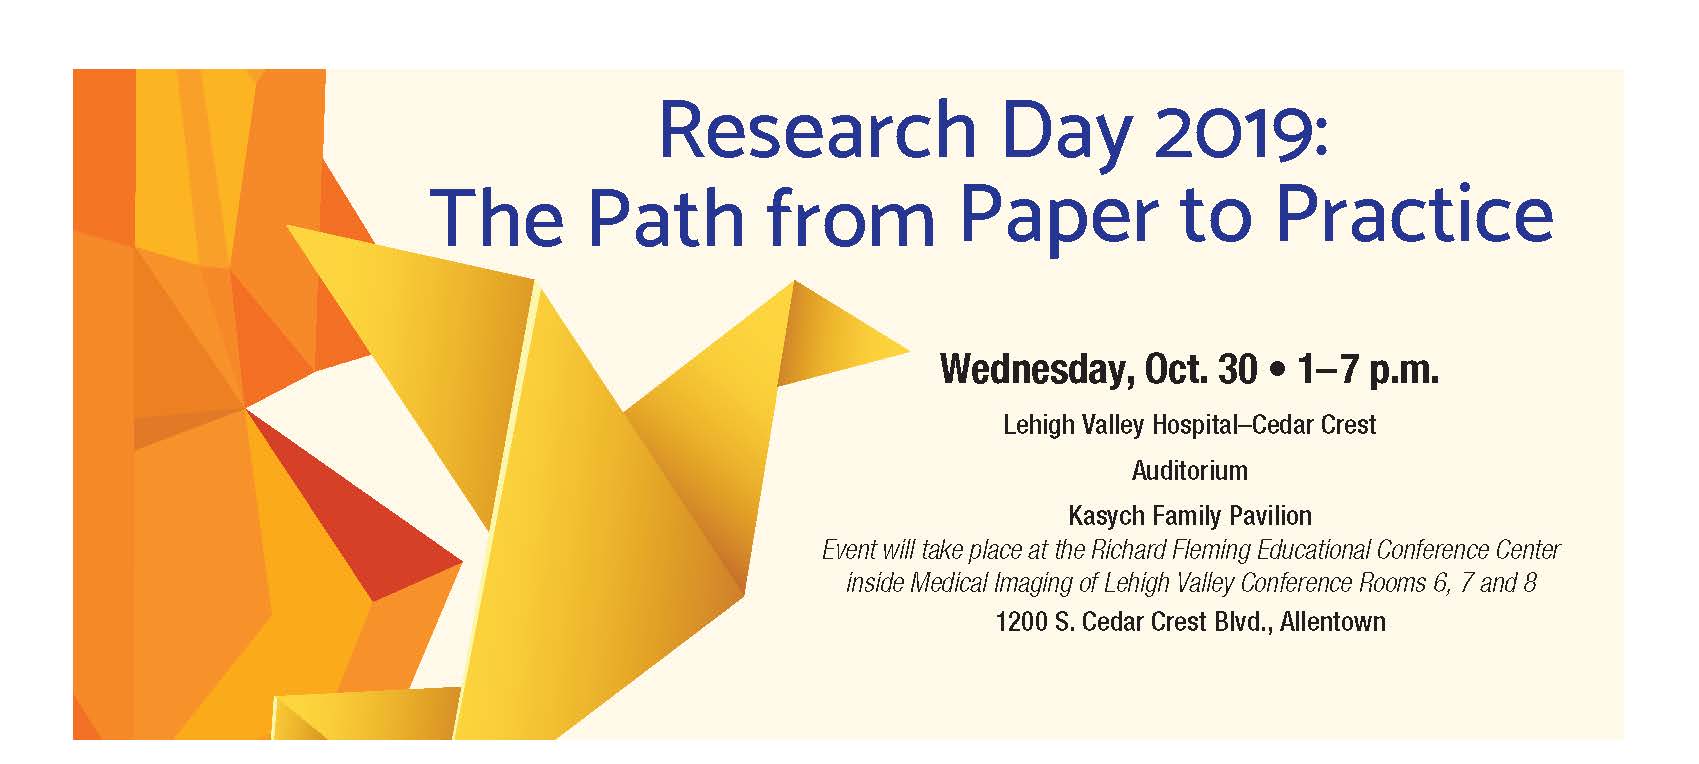 Research Day 2019: The Path from Paper to Practice